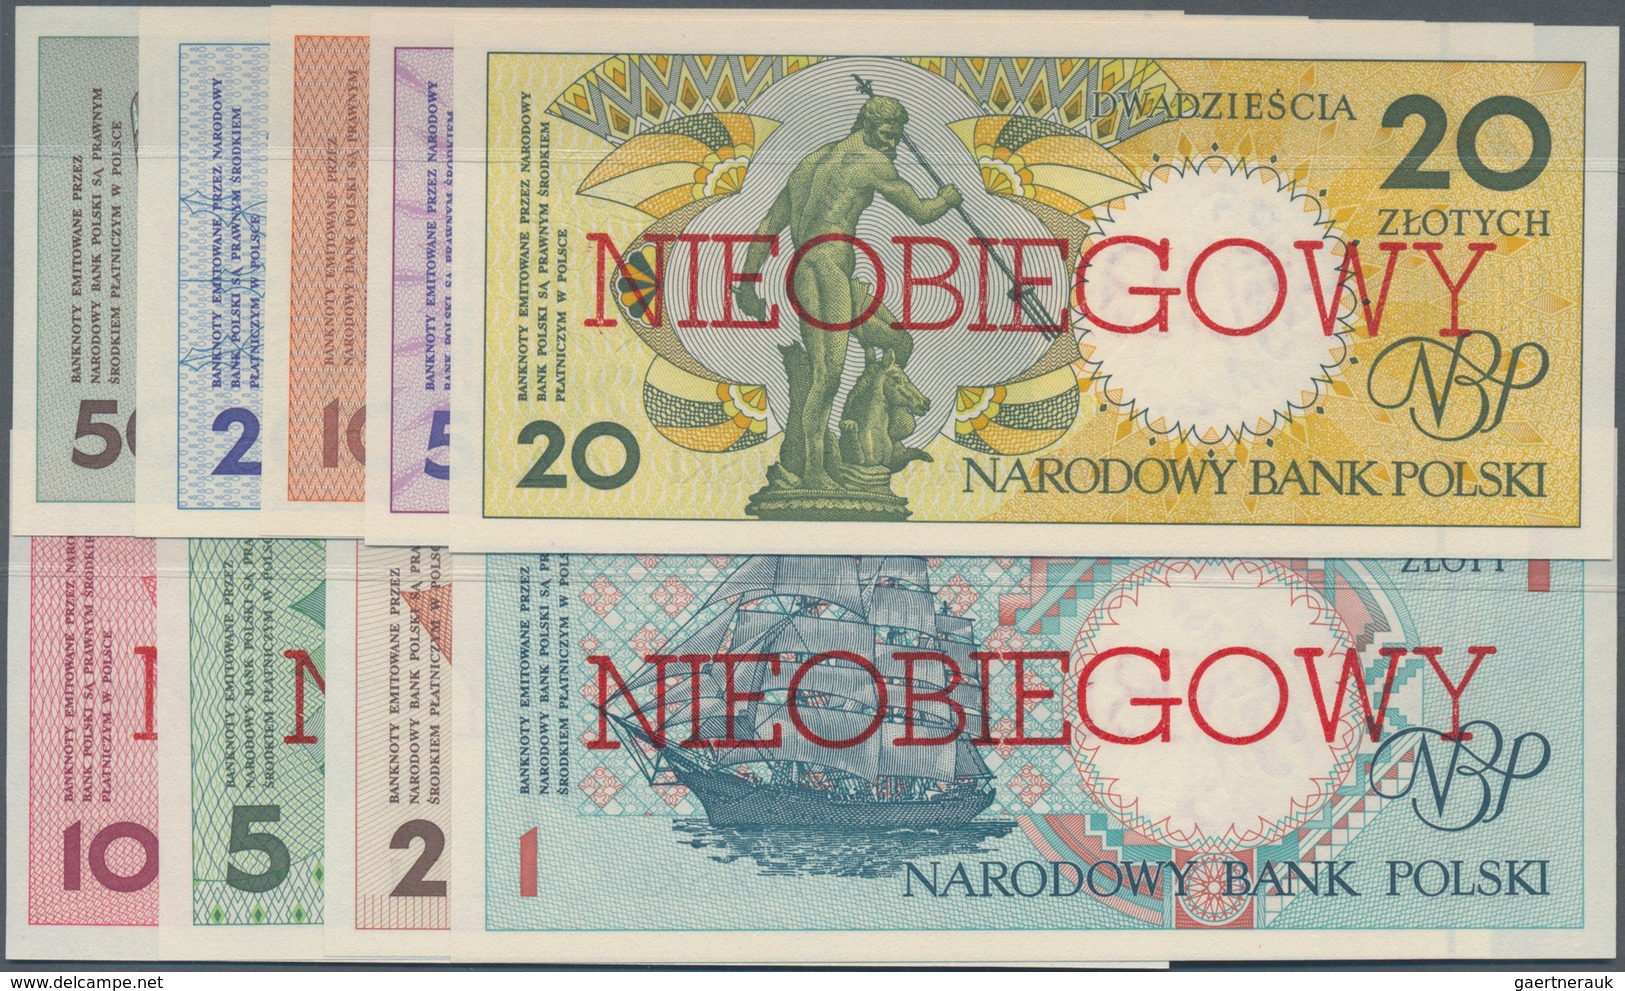 Poland / Polen: Set With 9 Banknotes Series 1990 “NIEOBIEGOWY” With 1, 2, 5, 10, 20, 50, 100, 200 An - Polonia